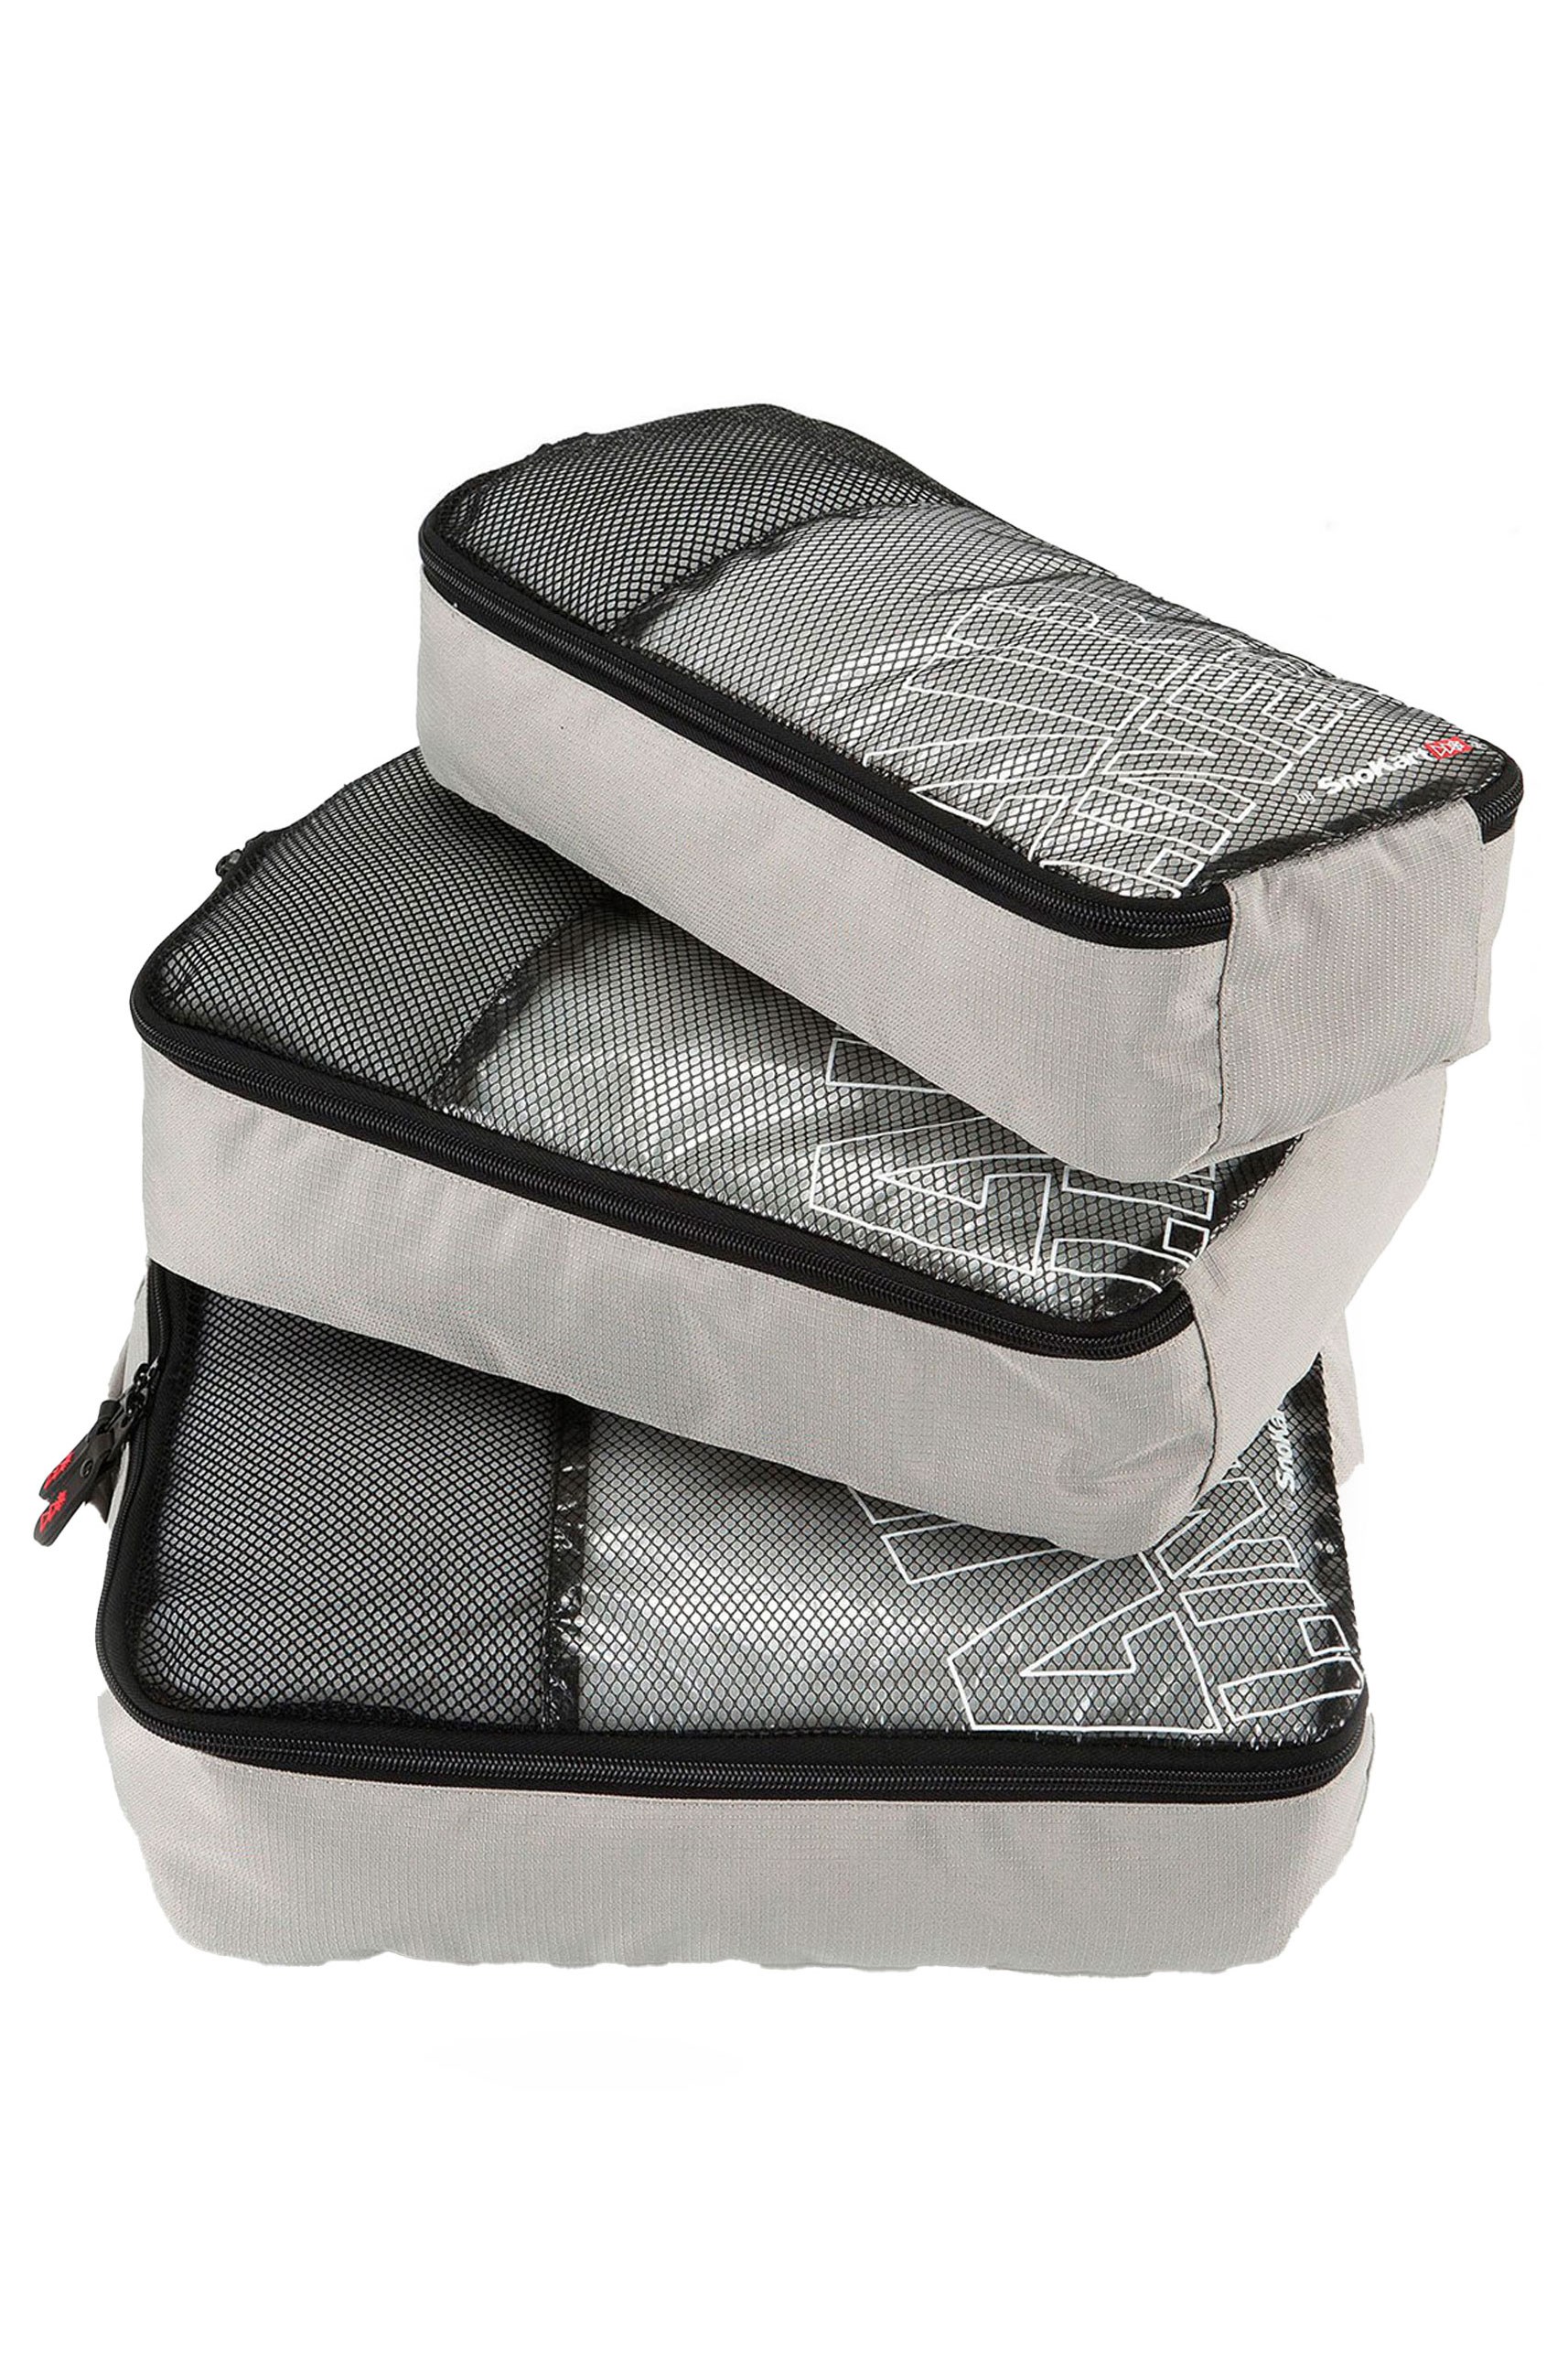 Airliner Packing Cubes -